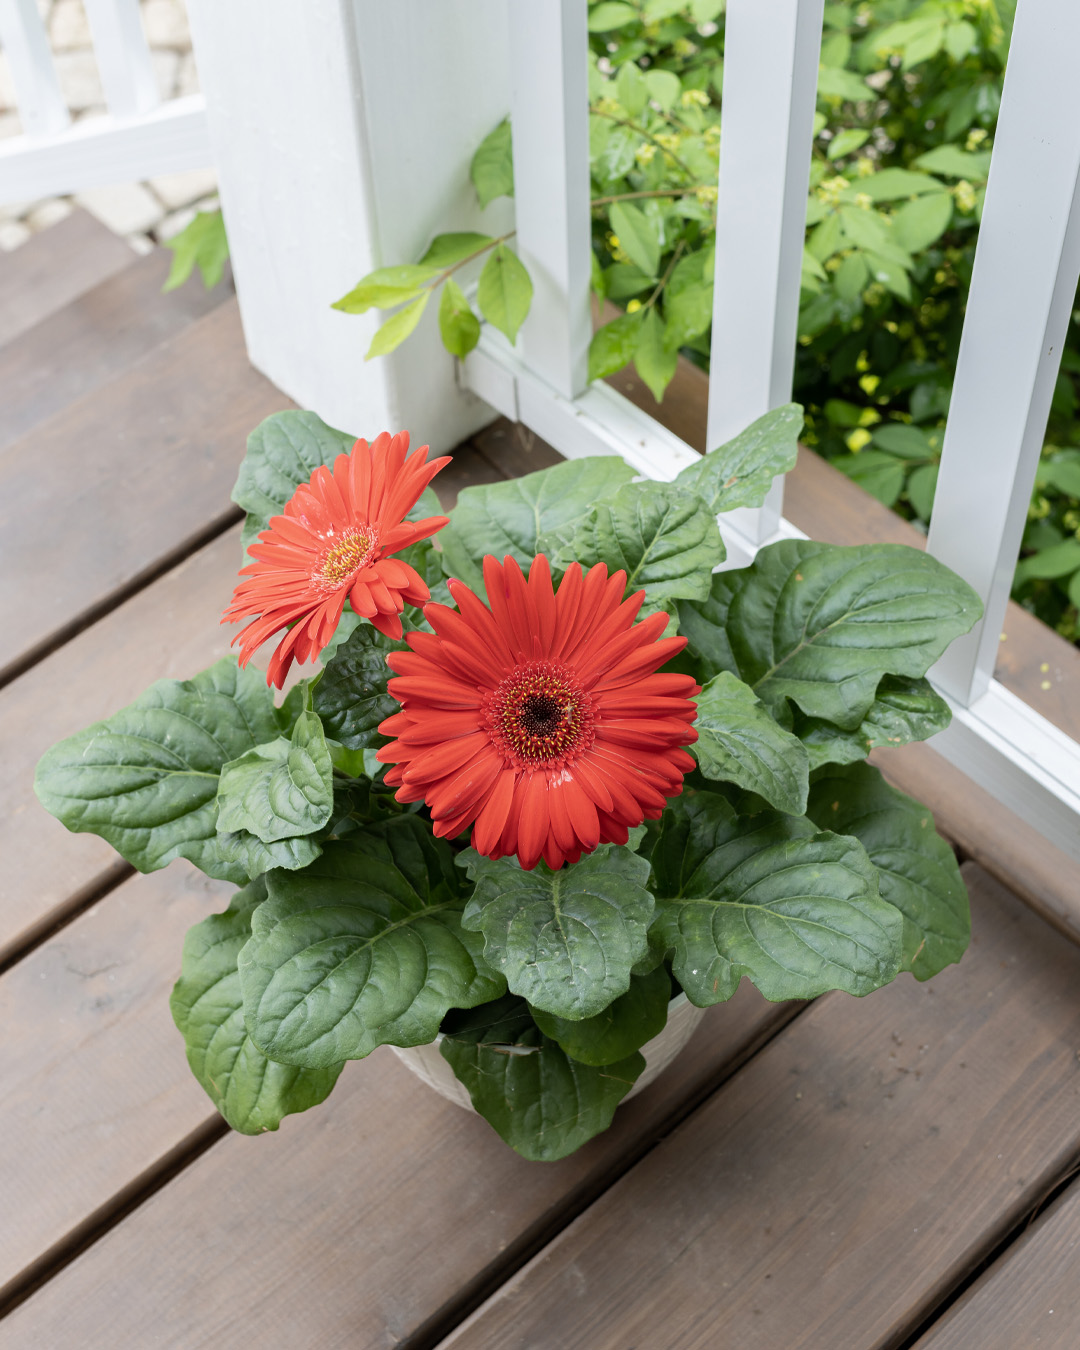 Gerbera daisies come in such bright colors, with such perfectly formed flowers that they often don't look real! Here's how to grow Gerbera daisies.